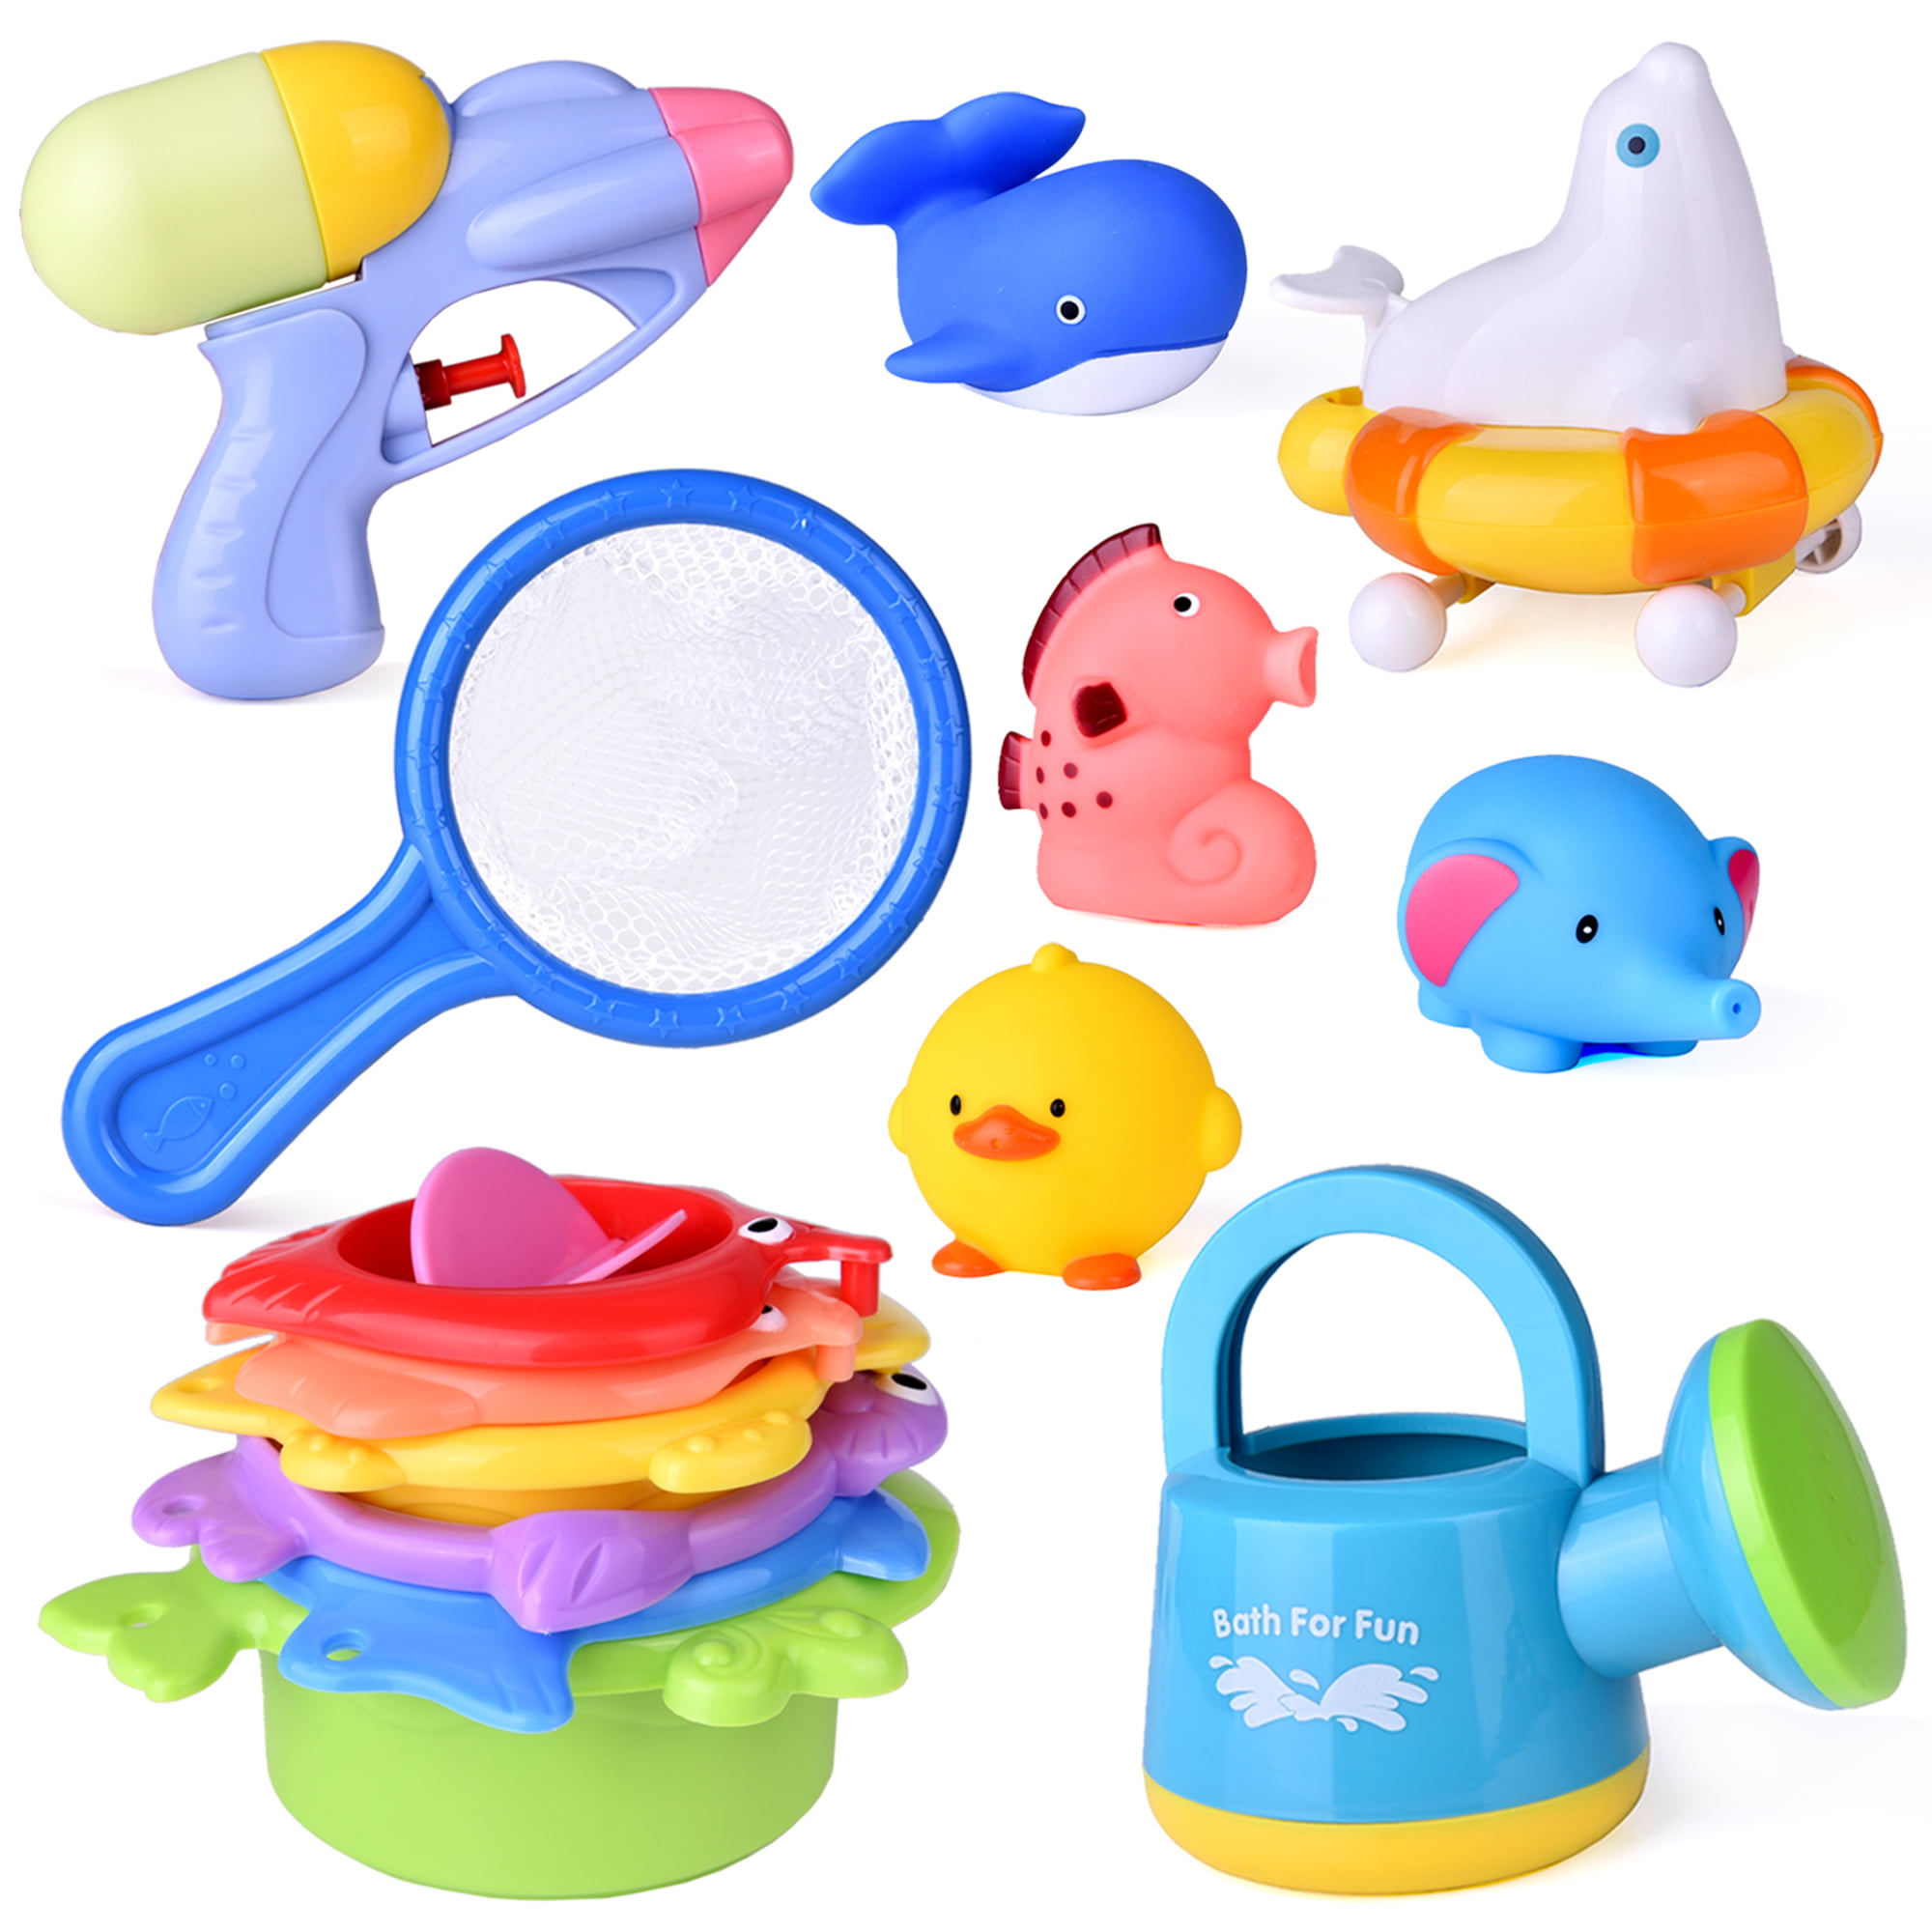 Bath Toys for Kids, Baby Pool Toys ,Toddler Educational 